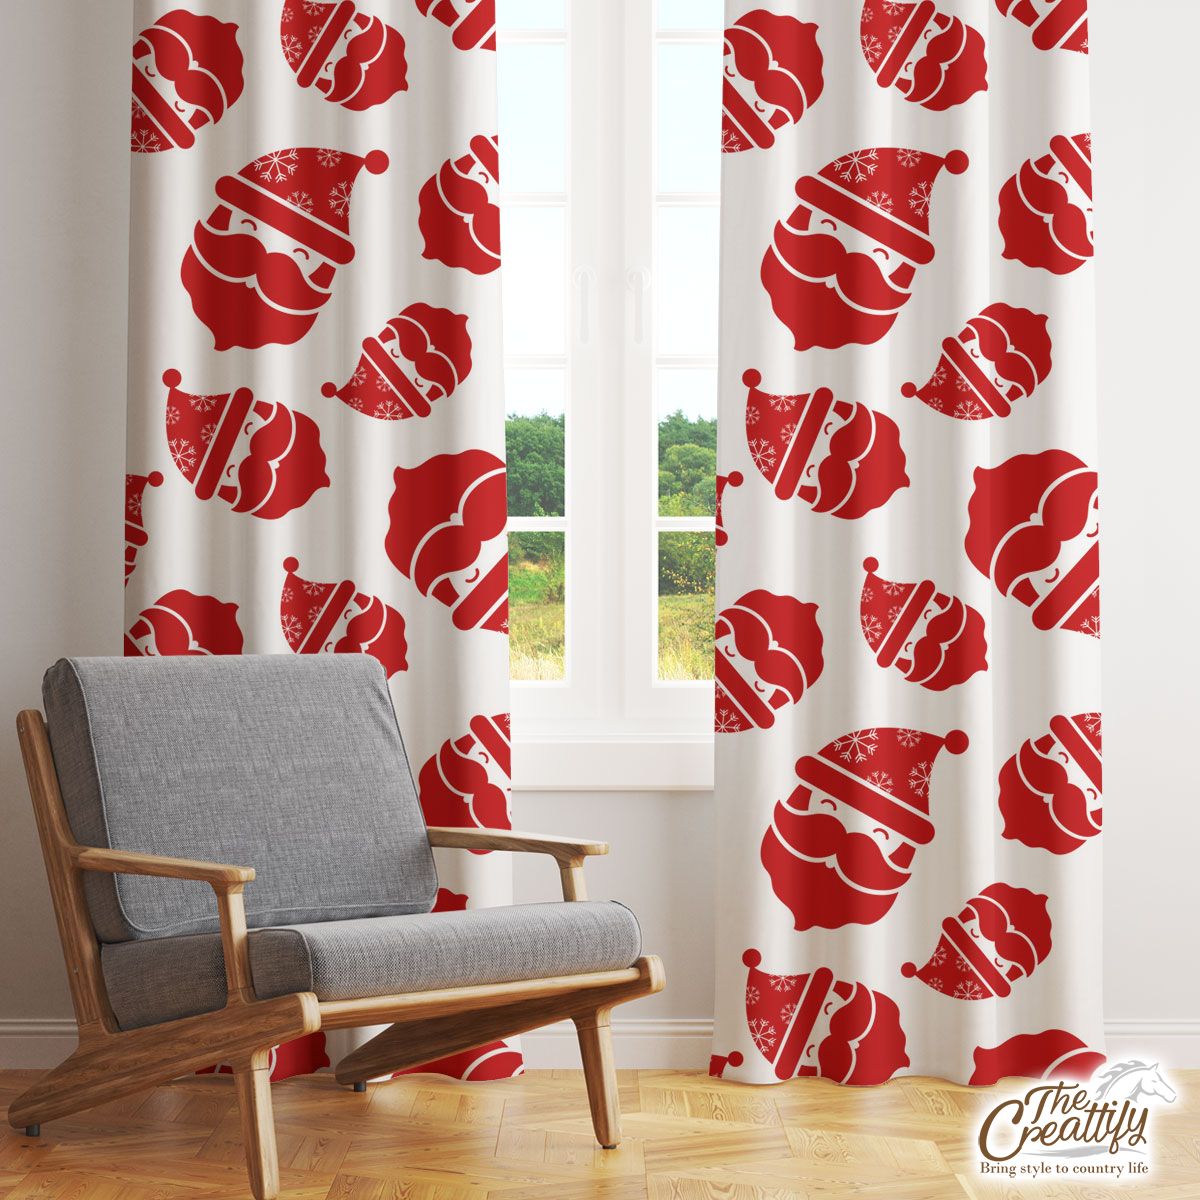 Happy Christmas With Santa Claus Seamless Pattern Window Curtain